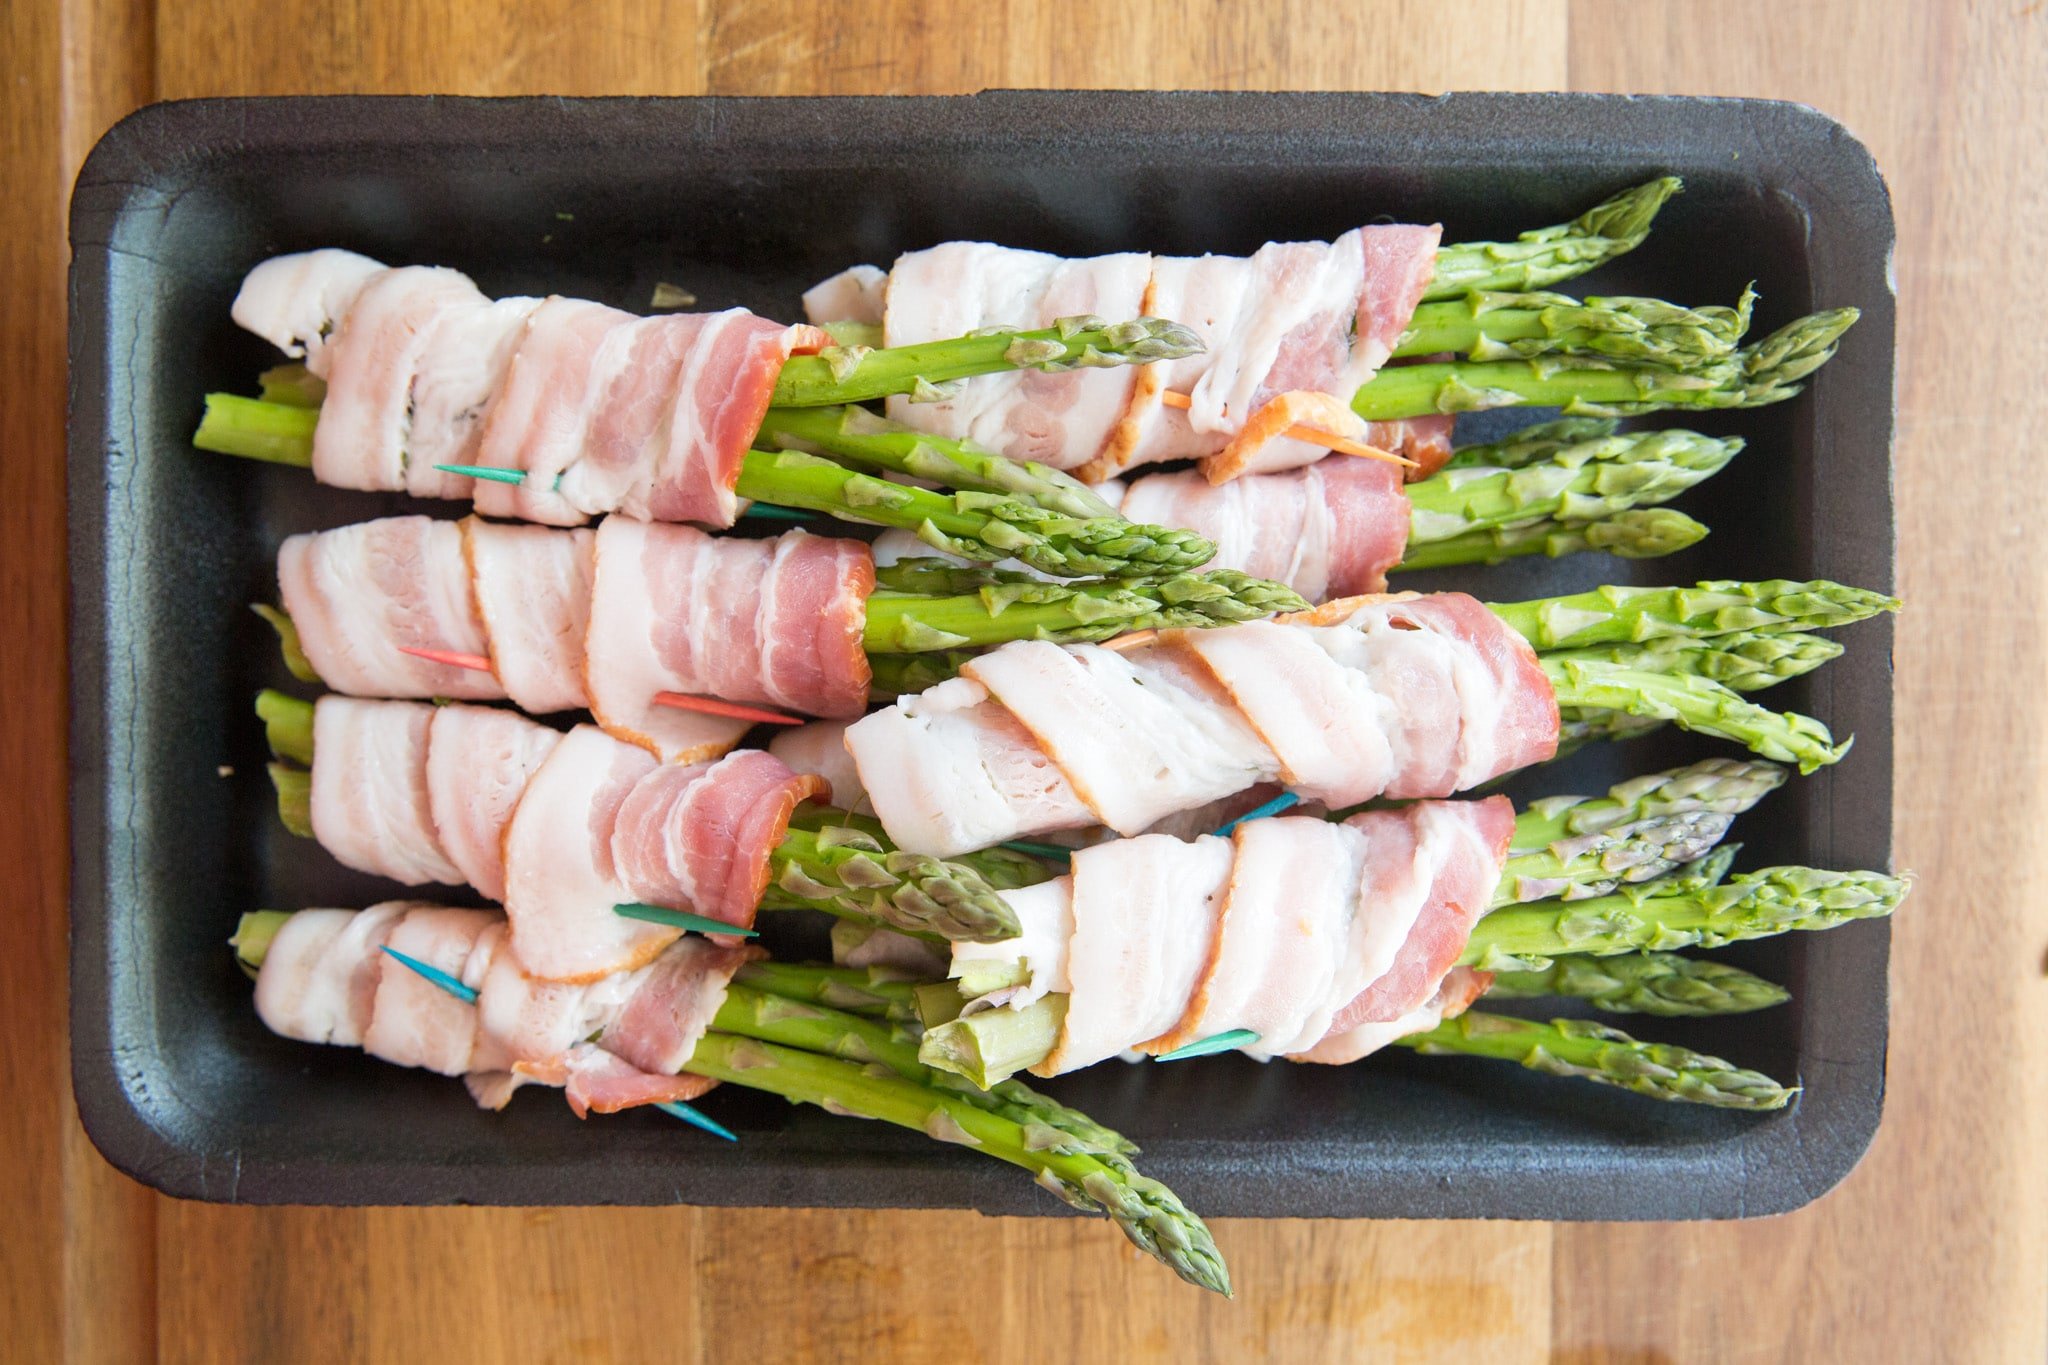 bacon wrapped around asparagus before cooking